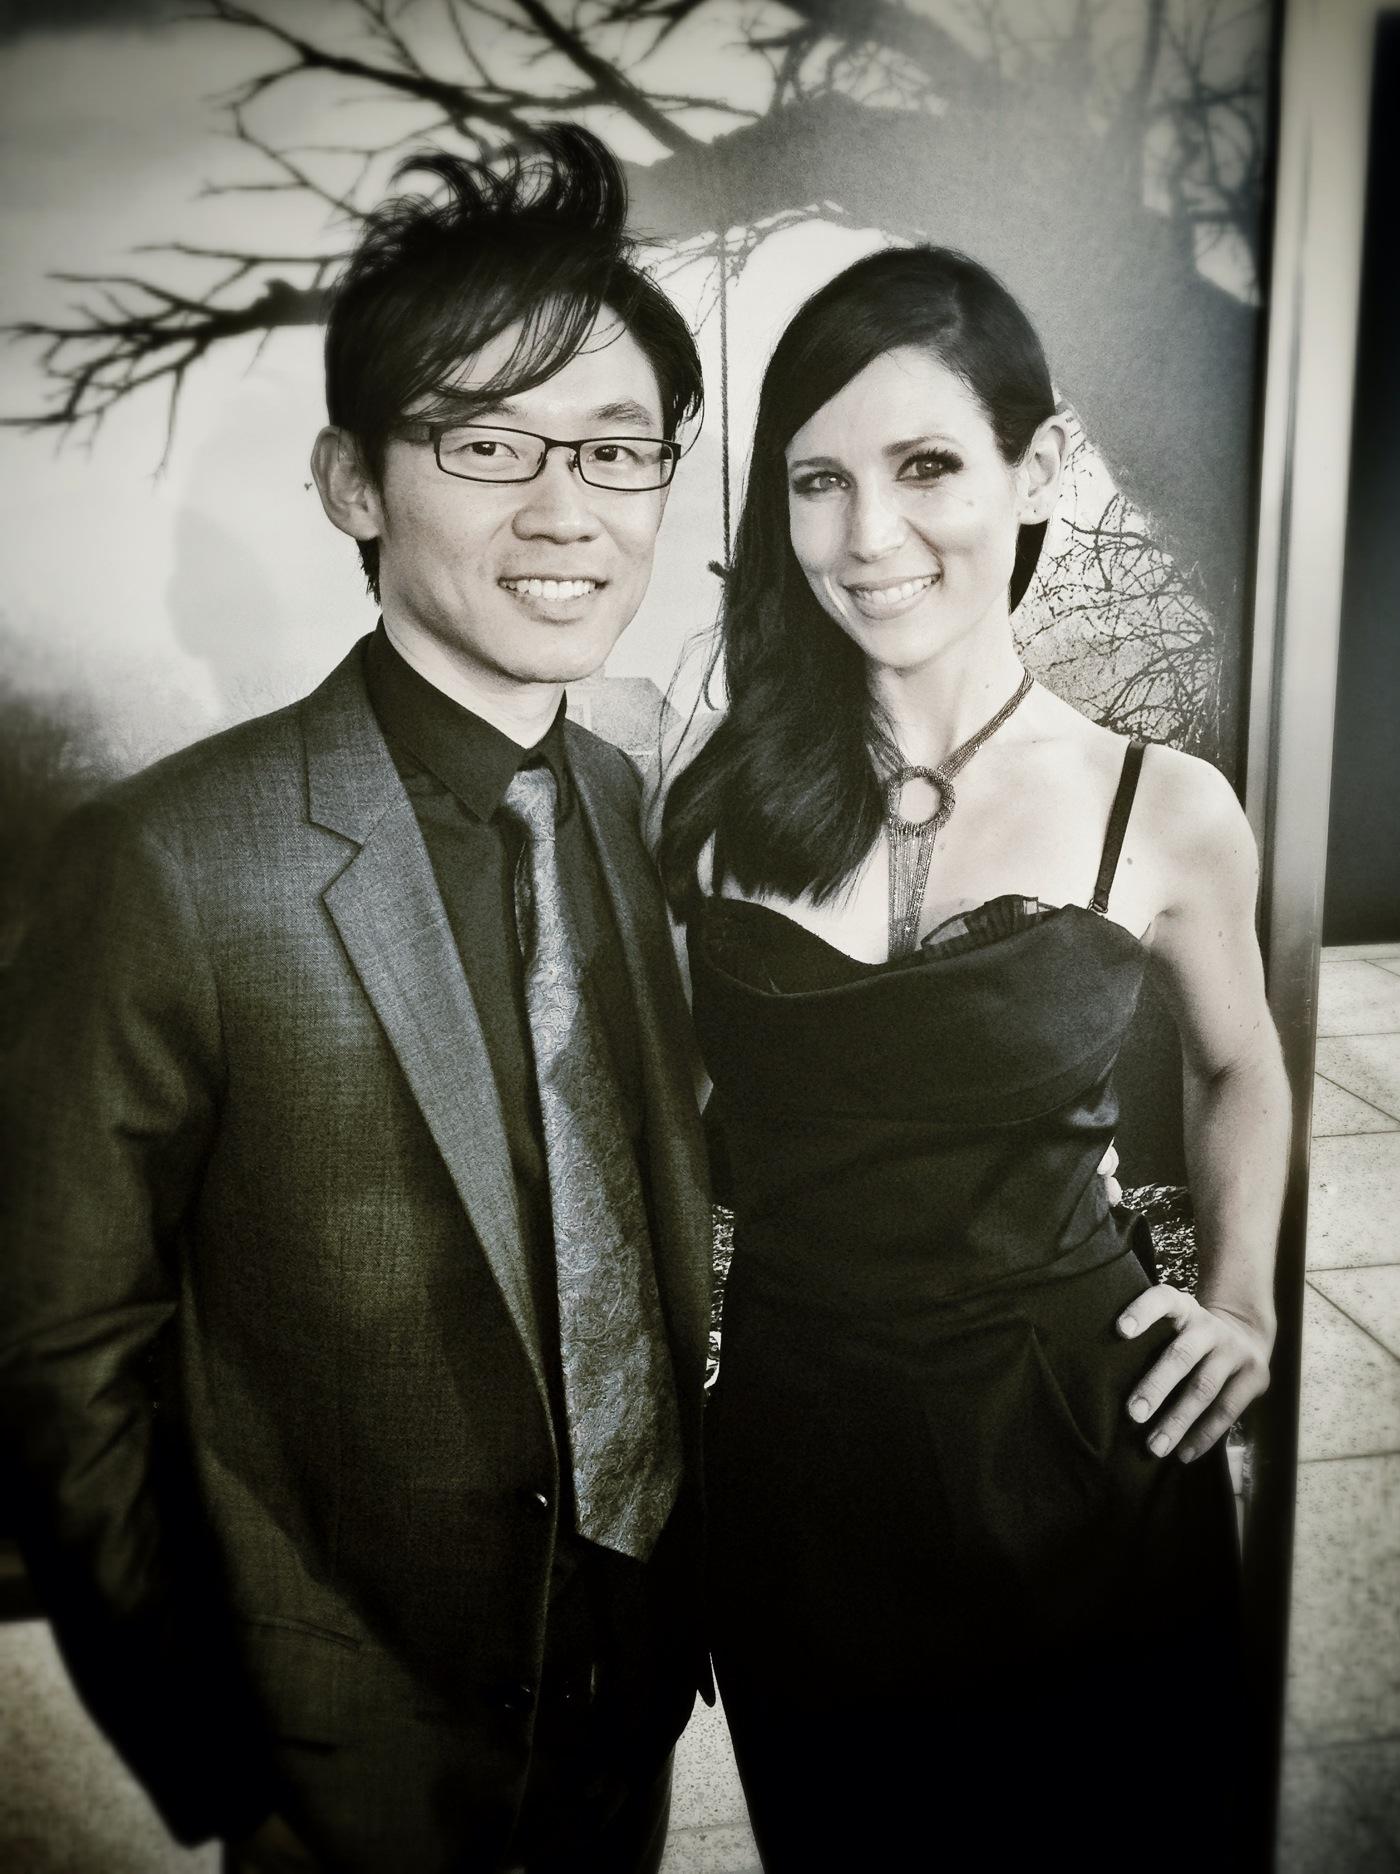 Victoria Paege and James Wan at event of 'The Conjuring'